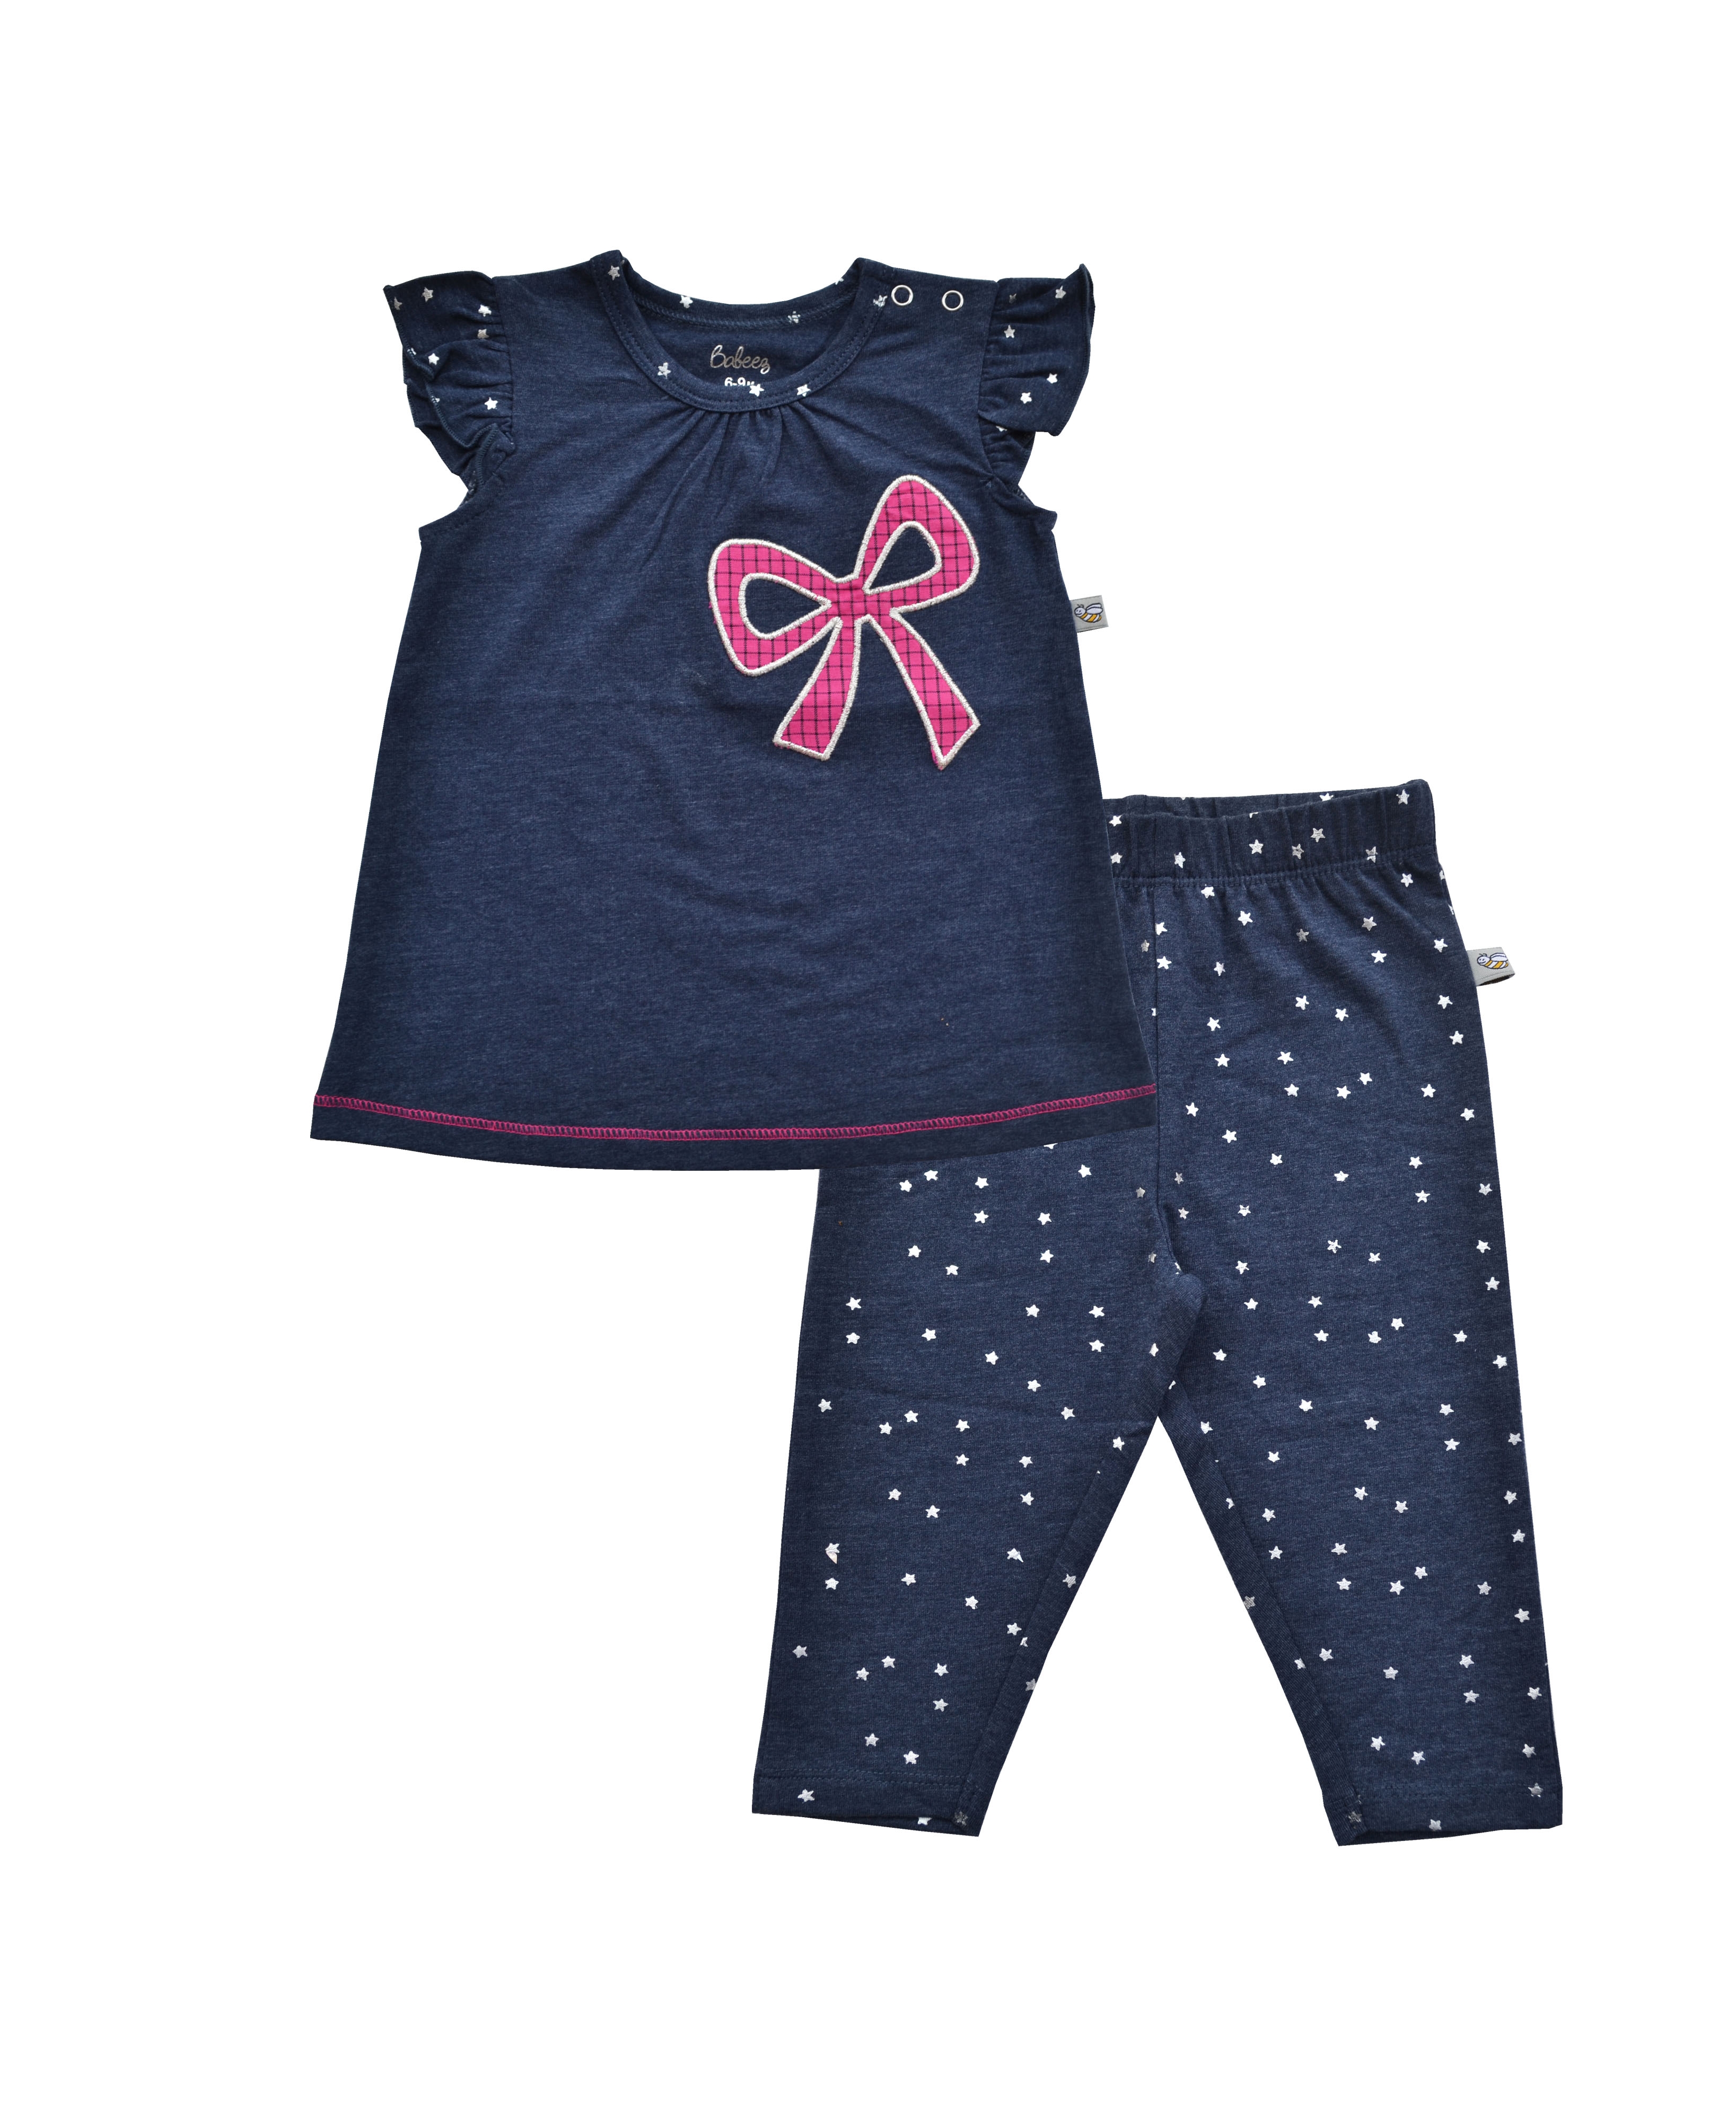 Denim Blue Top with Pink Bow Applique and Silver Star Allover Print on Denim Blue Legging (95% Cotton 5% Elasthan)